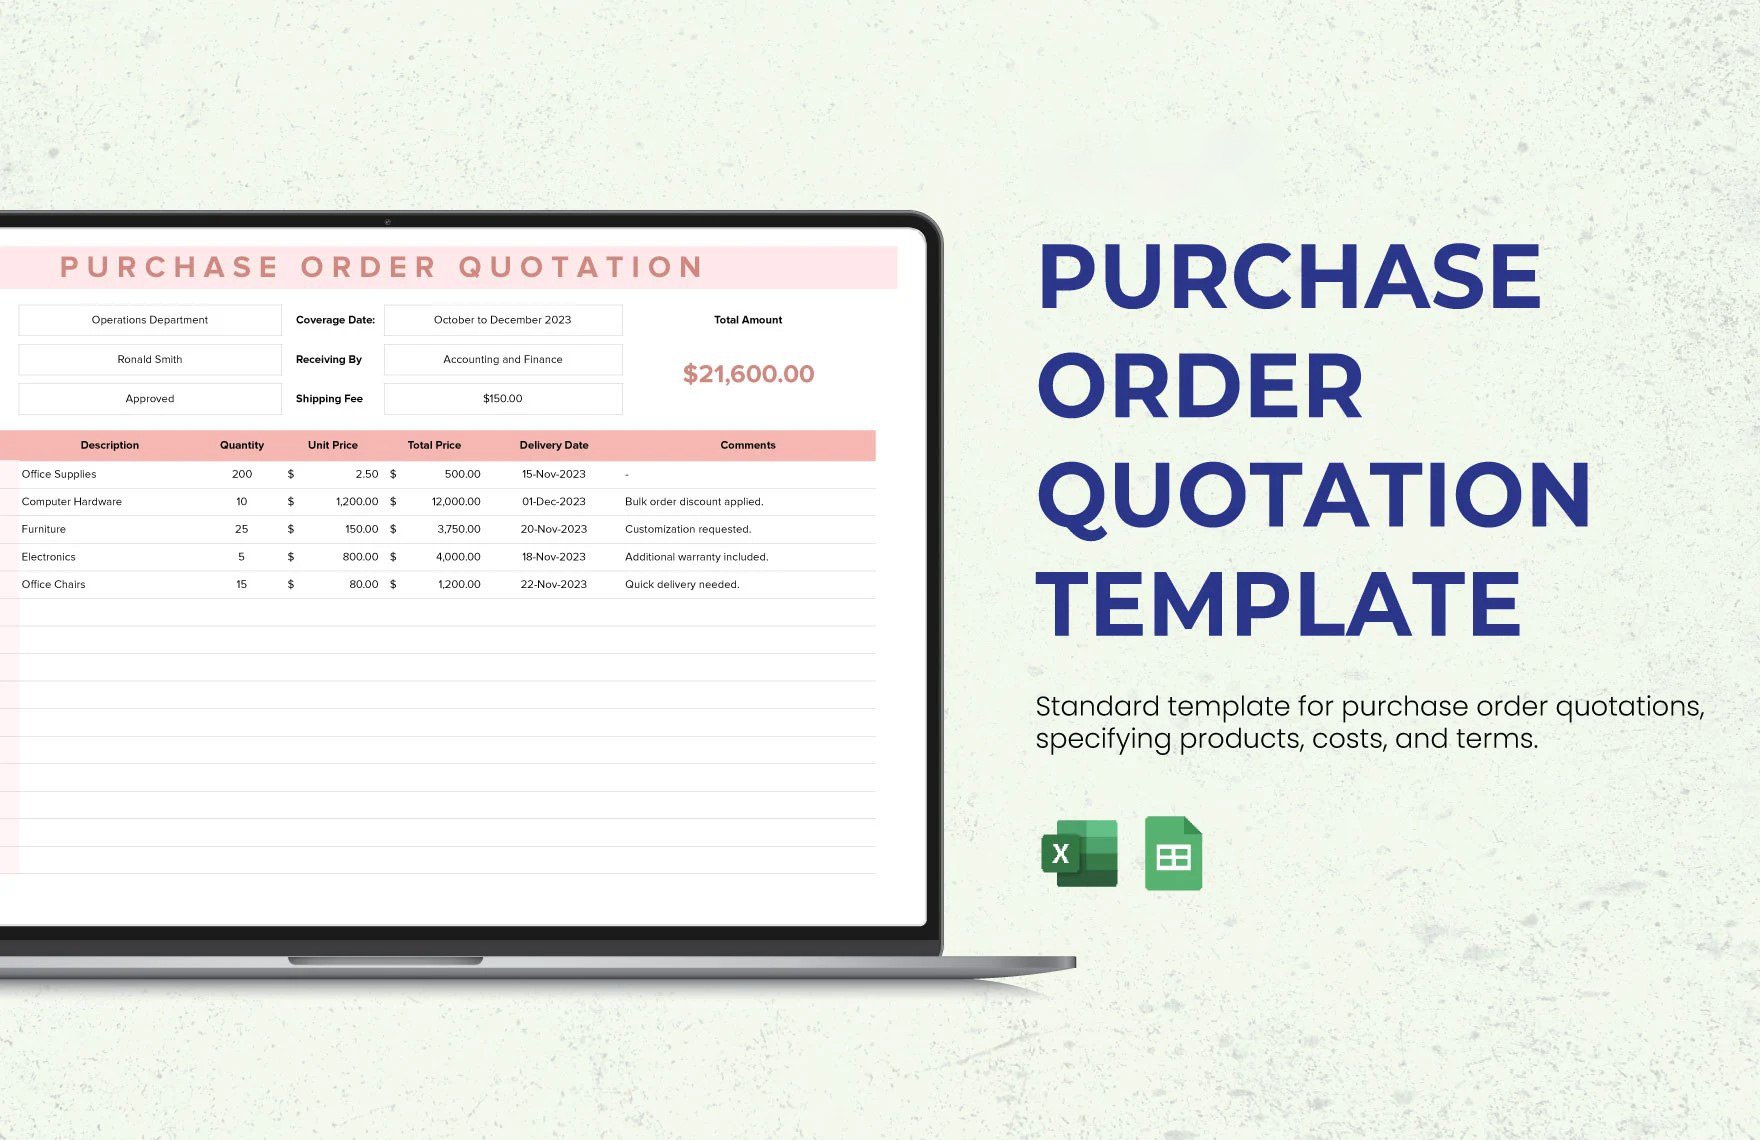 Purchase Order Quotation Template